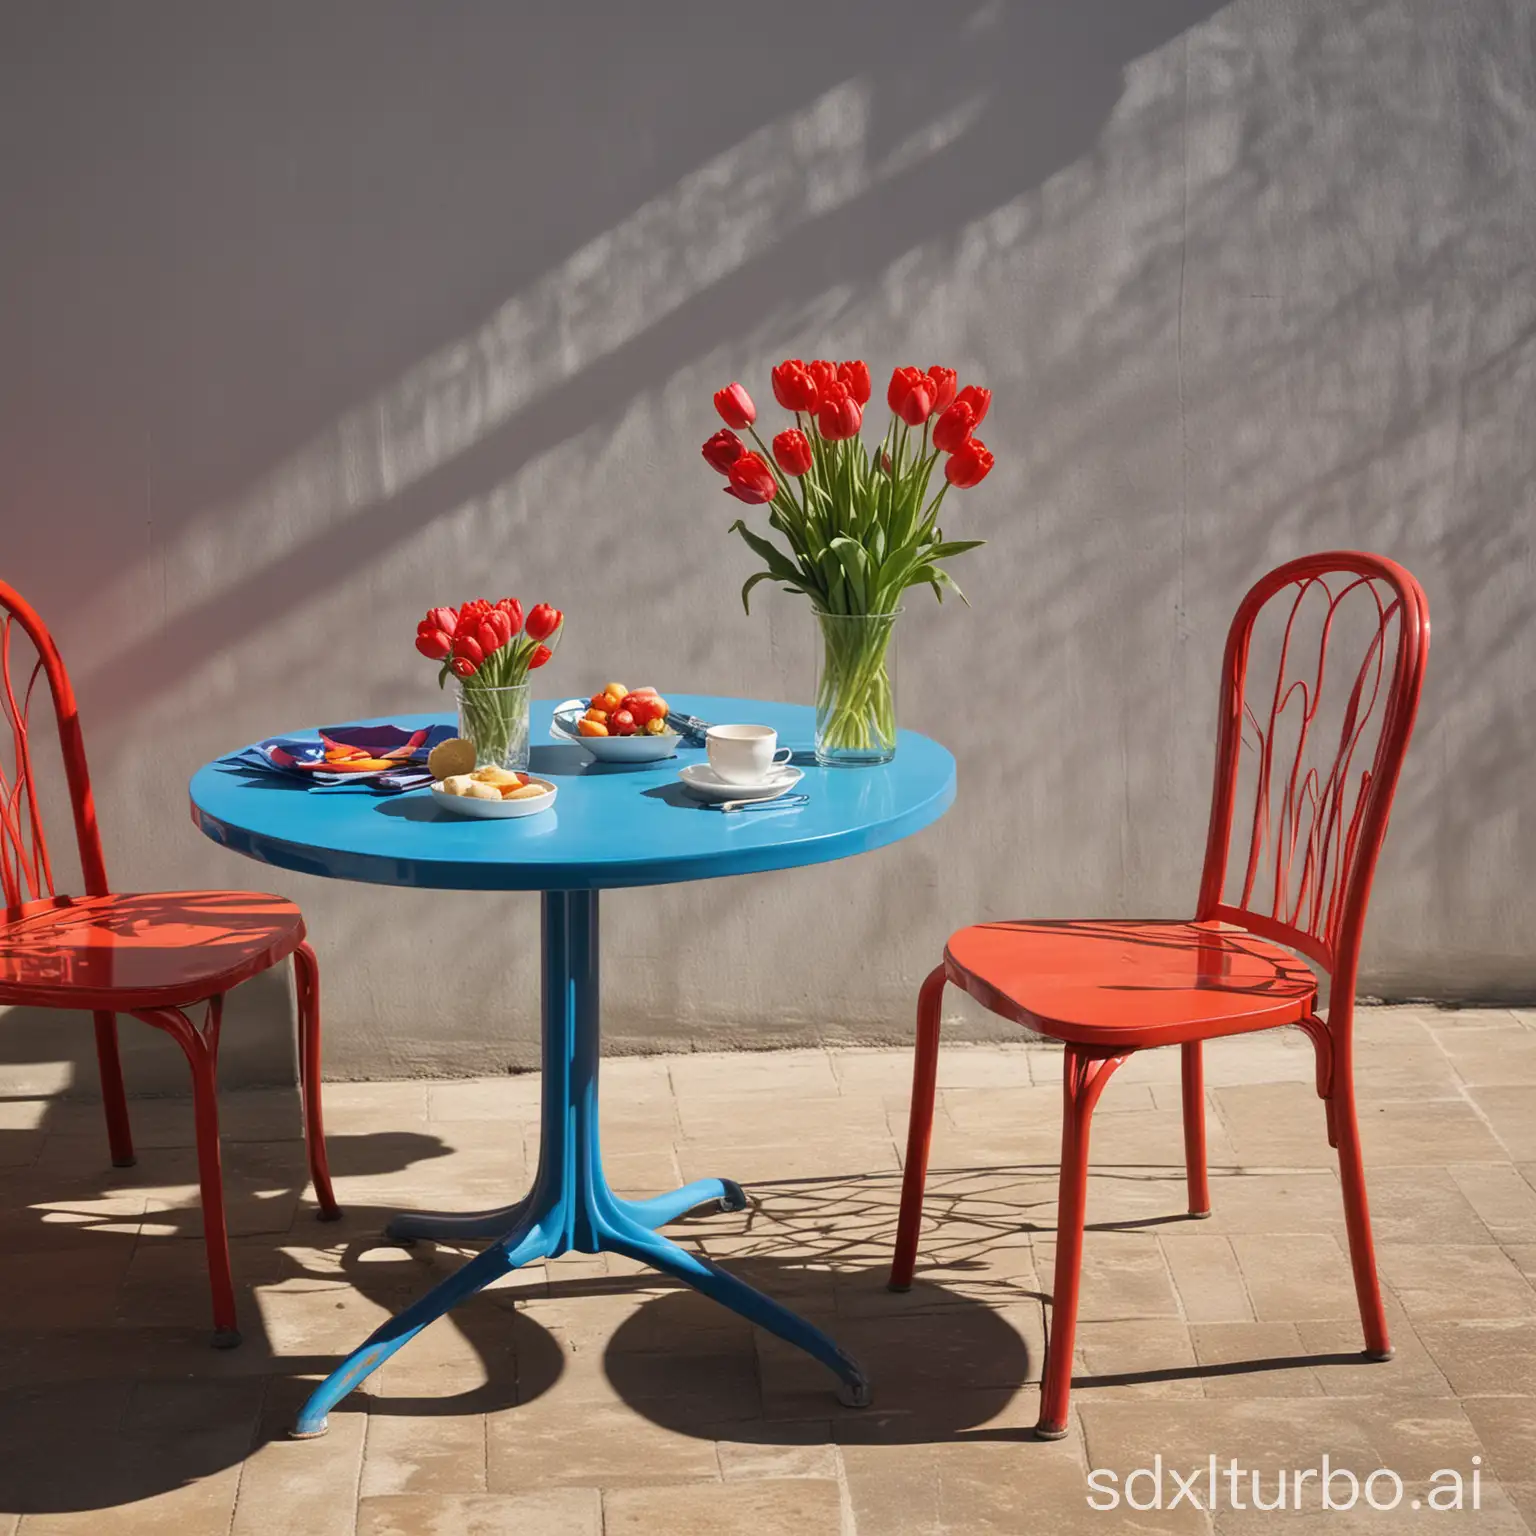 tulip, red, blue table, chair, sunshine